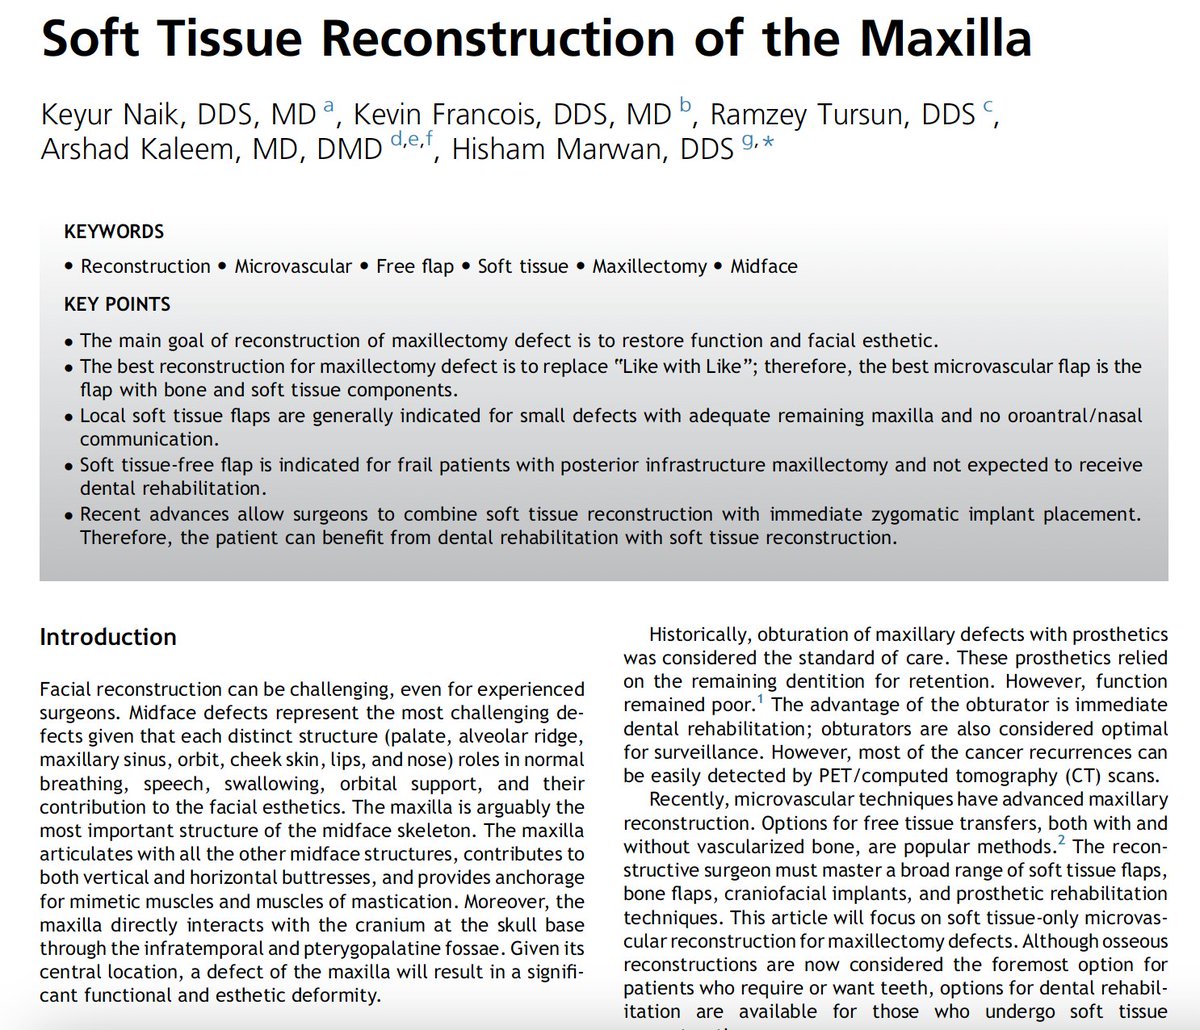 Happy to share our new publication in the Atlas of Oral and Maxillofacial Surgery @ClinicalKey @ClinicsReviews. A great group from different institutions focusing on soft tissue reconstruction for midface/ maxillectomy defects @UTMB_OMFS